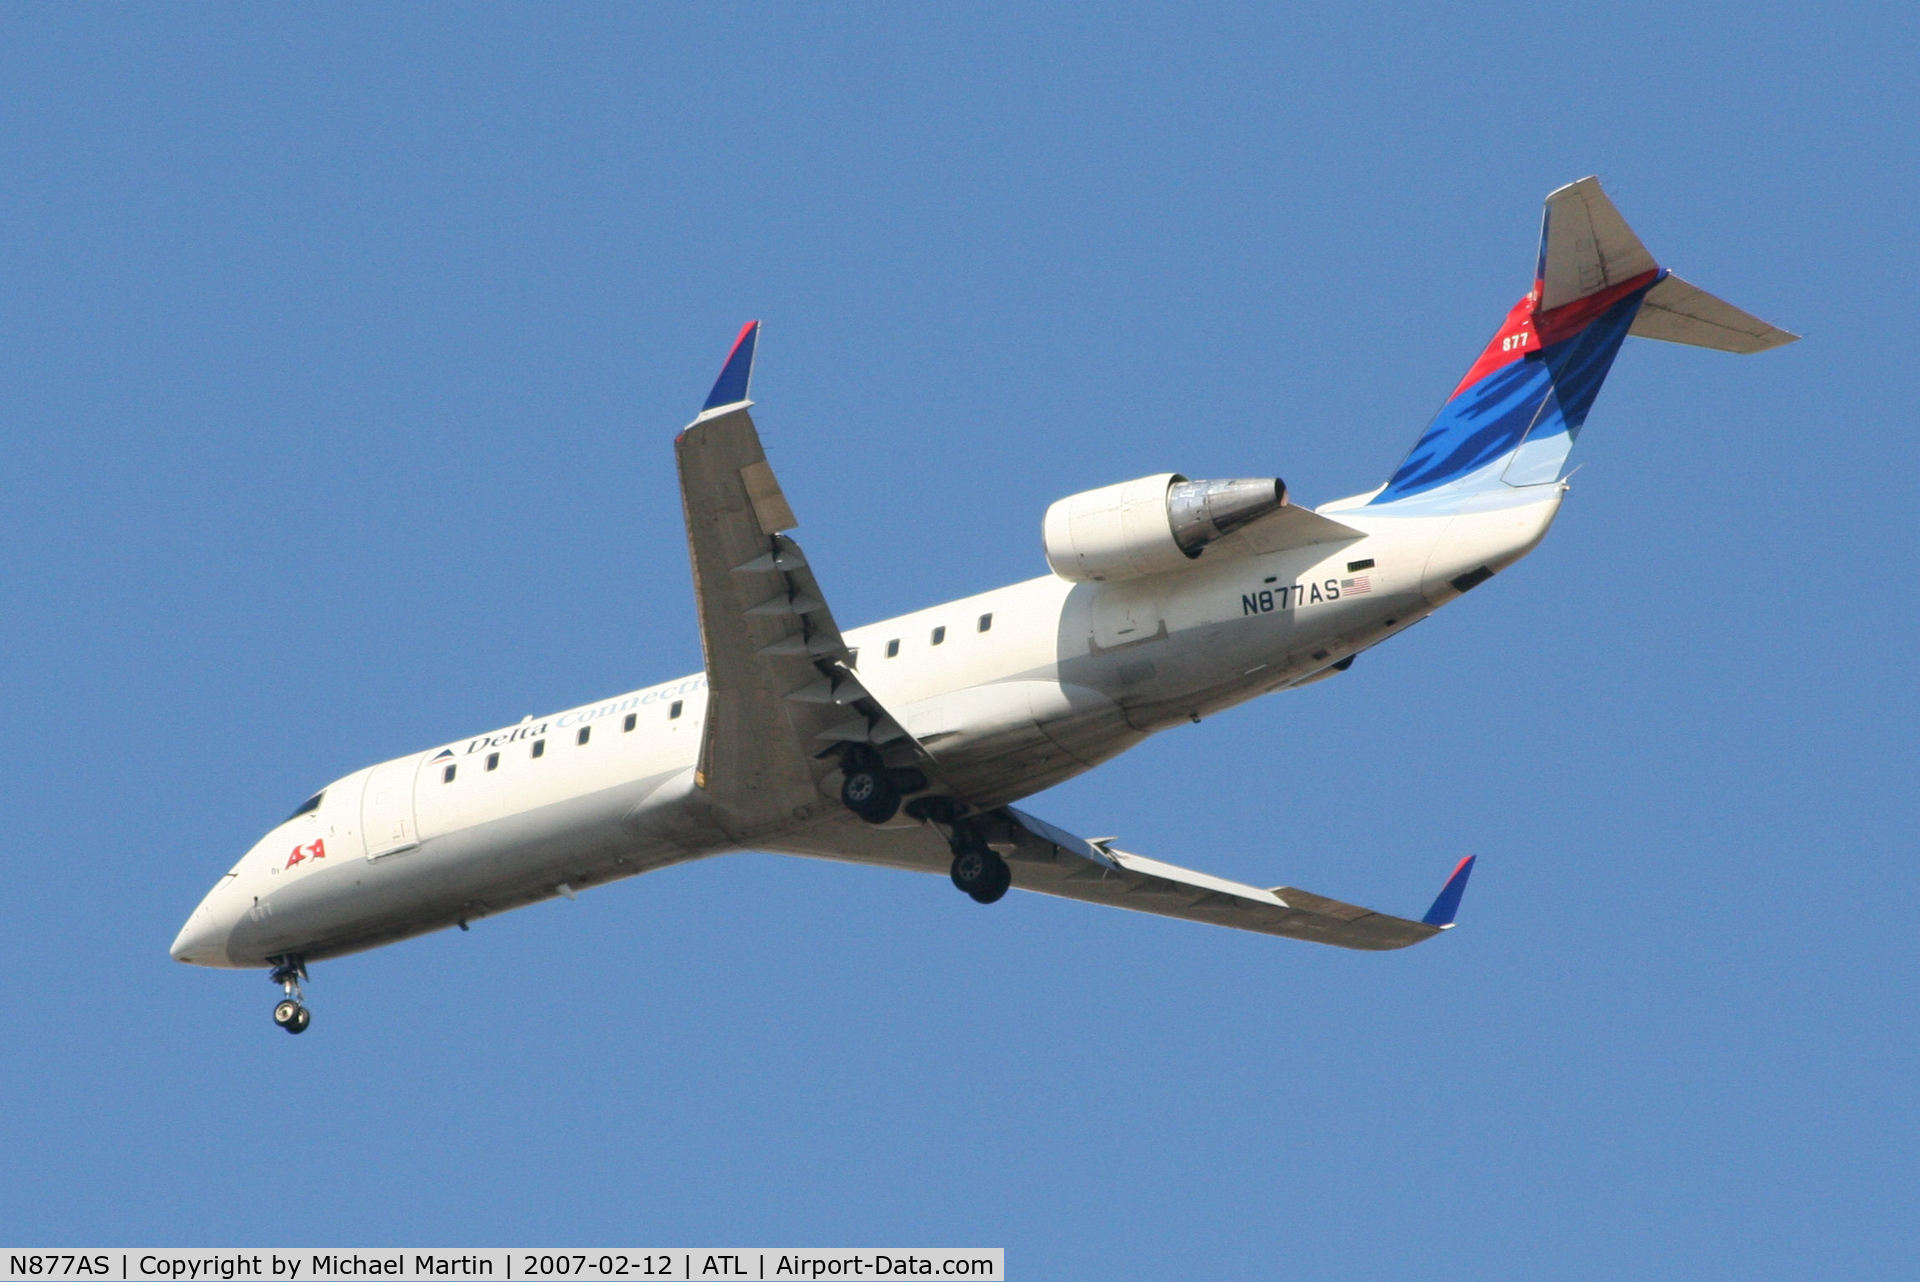 N877AS, 2001 Bombardier CRJ-200ER (CL-600-2B19) C/N 7579, Over the numbers of 26L